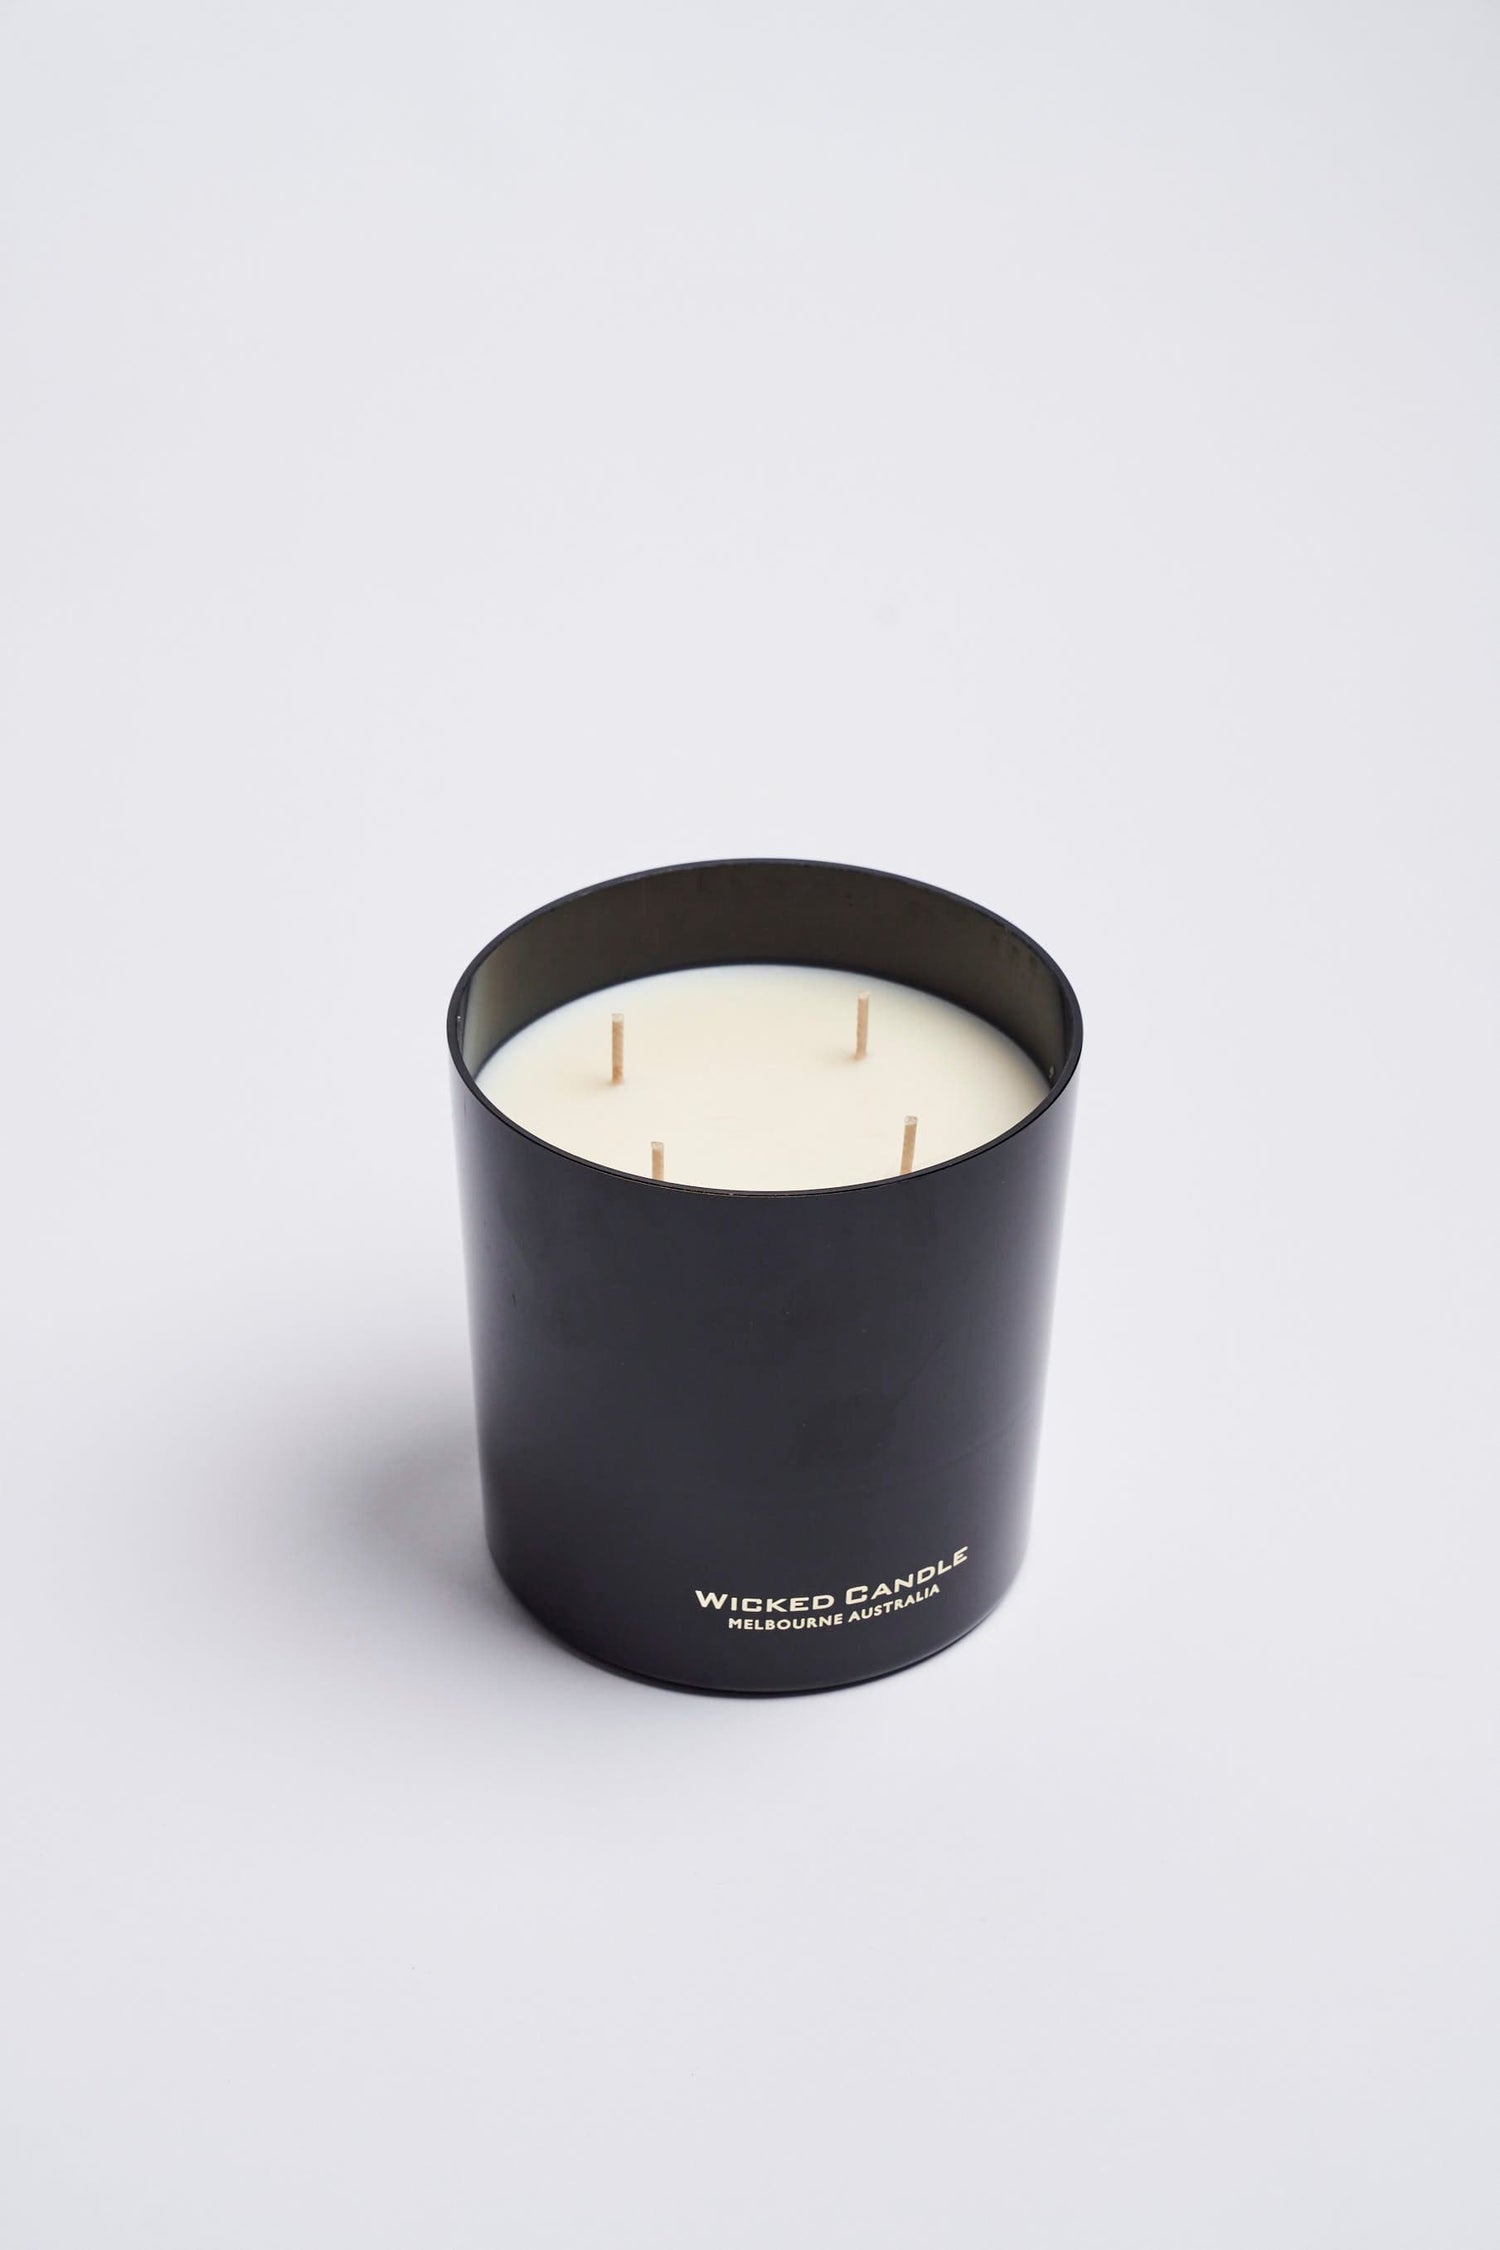 French Pear Soy Wax Jumbo Candle